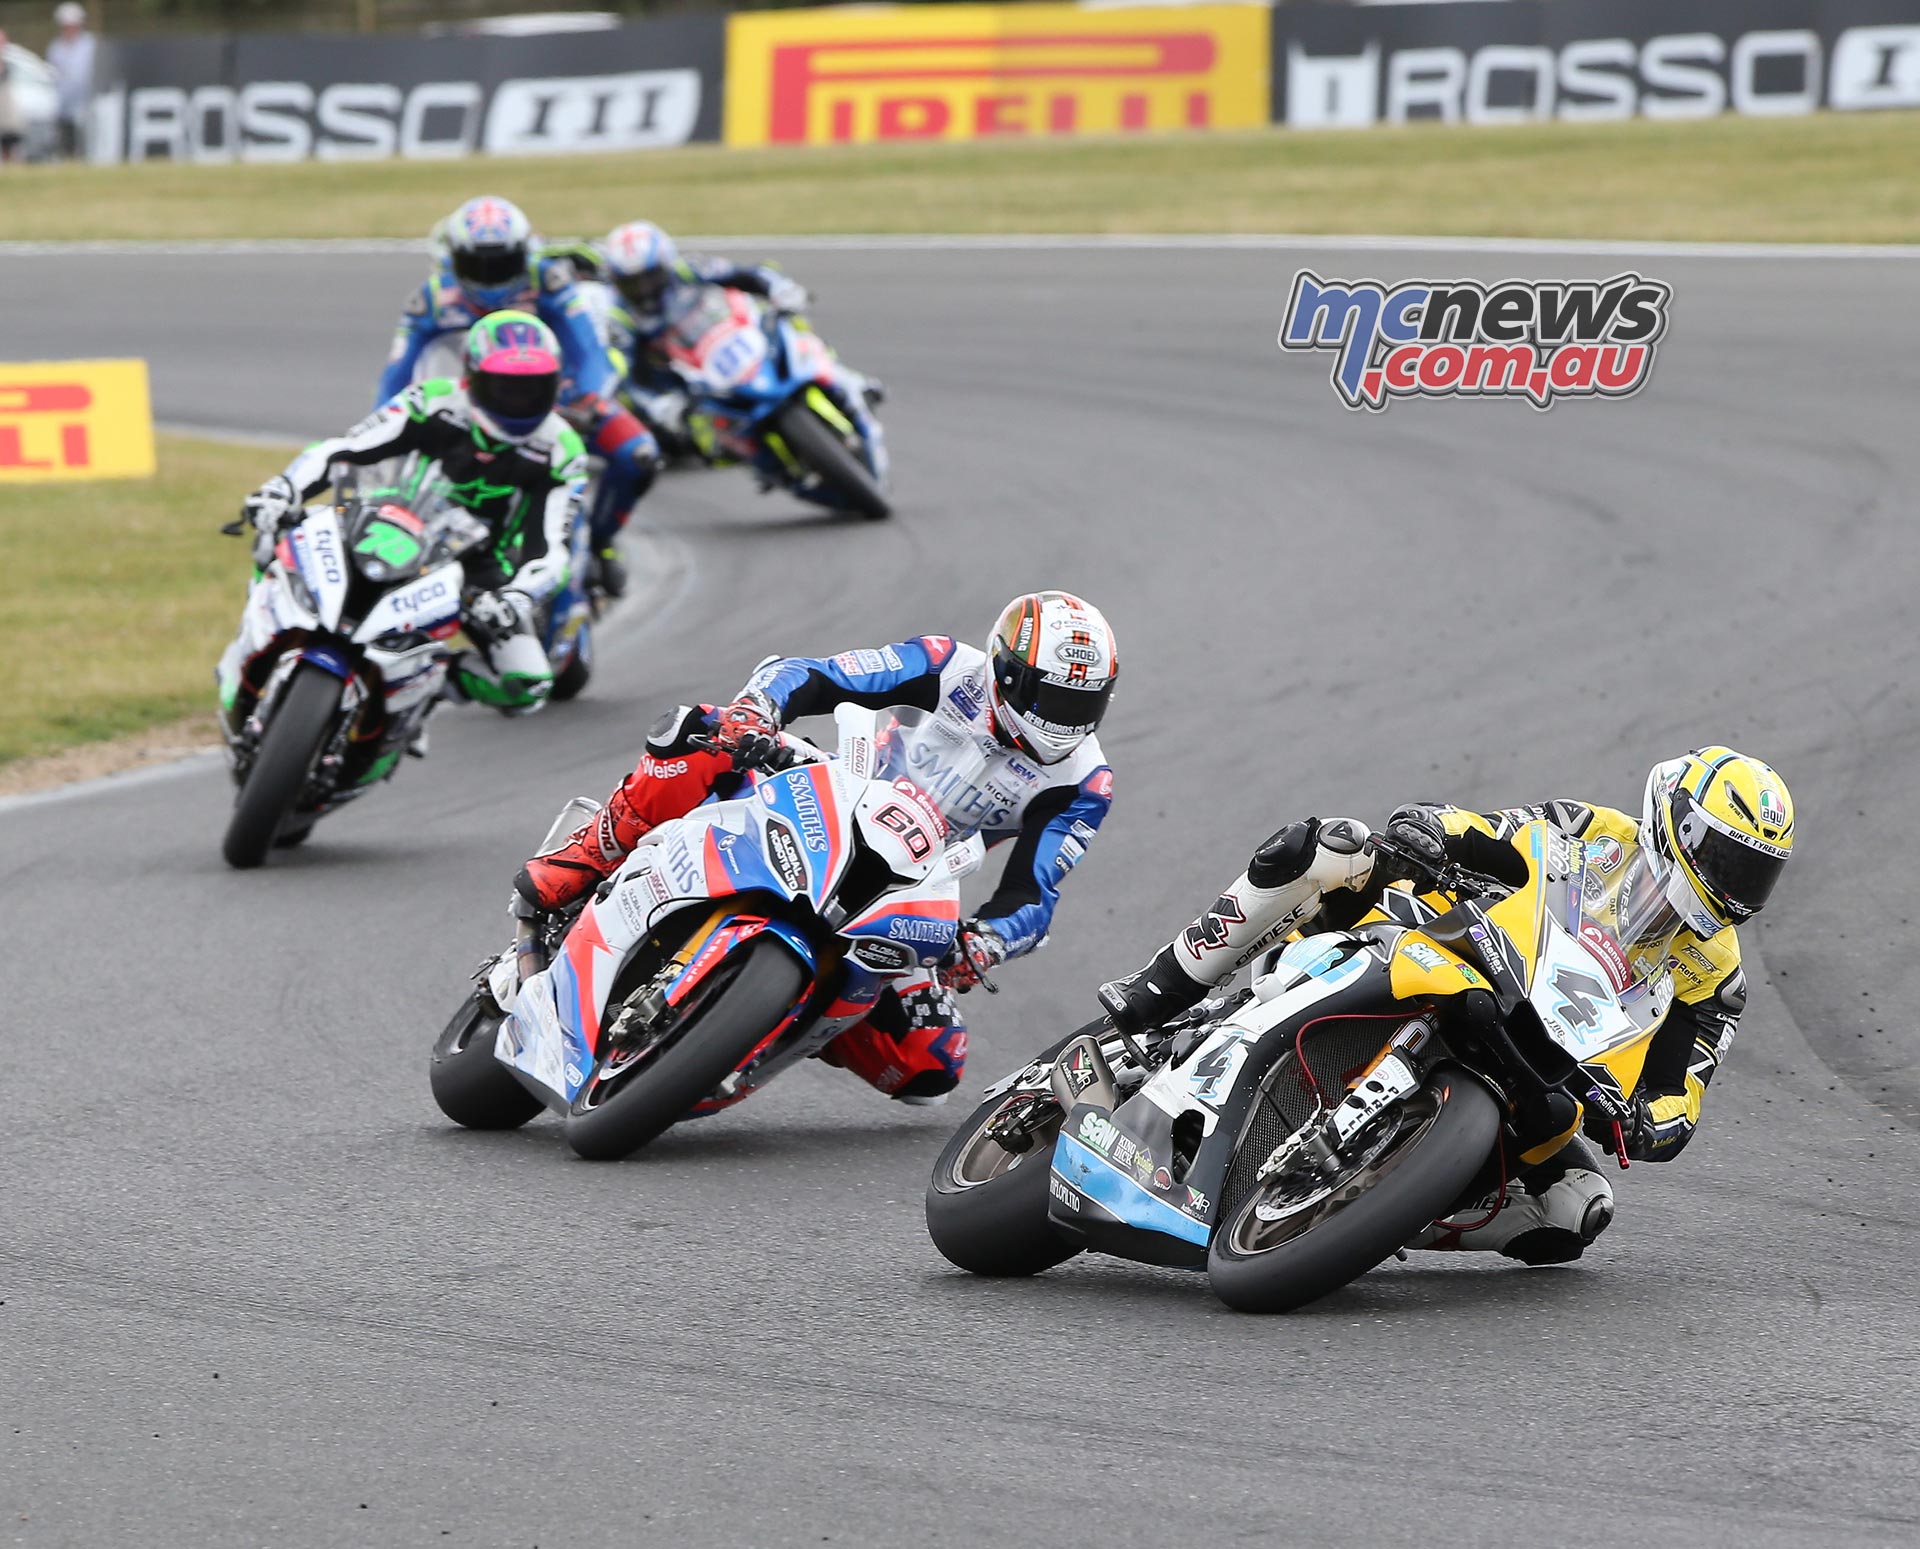 Snetterton Bsb Image Overload Part One Mcnews